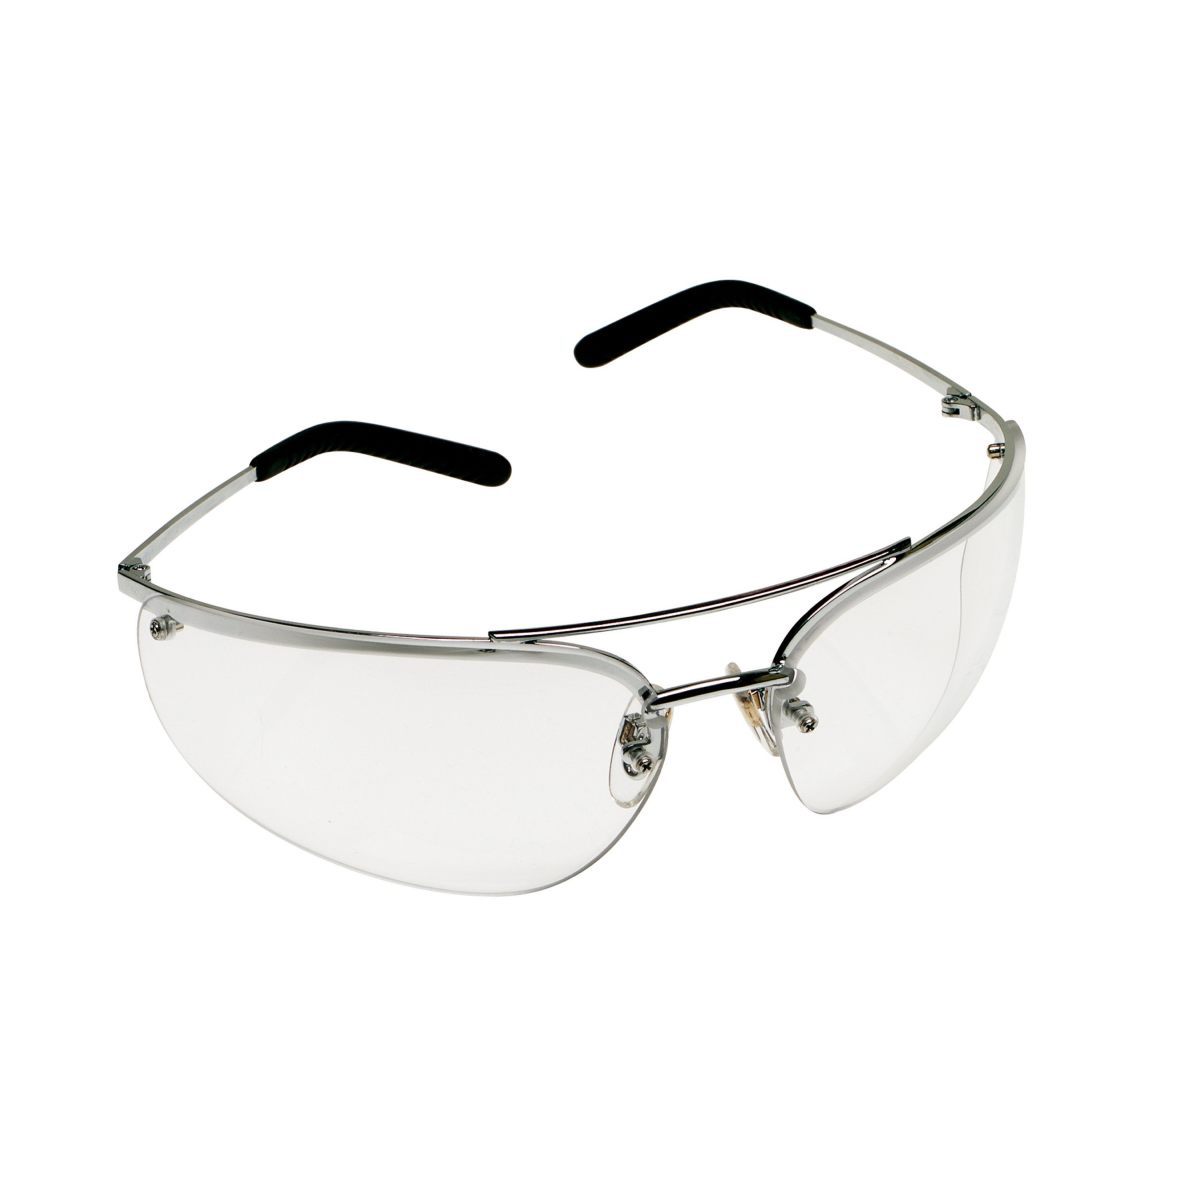 3M™ Metaliks™ Protective Eyewear, 15170-10000-20 Clear Anti-Fog Lens, Polished Metal Frame (Availability restrictions apply.)